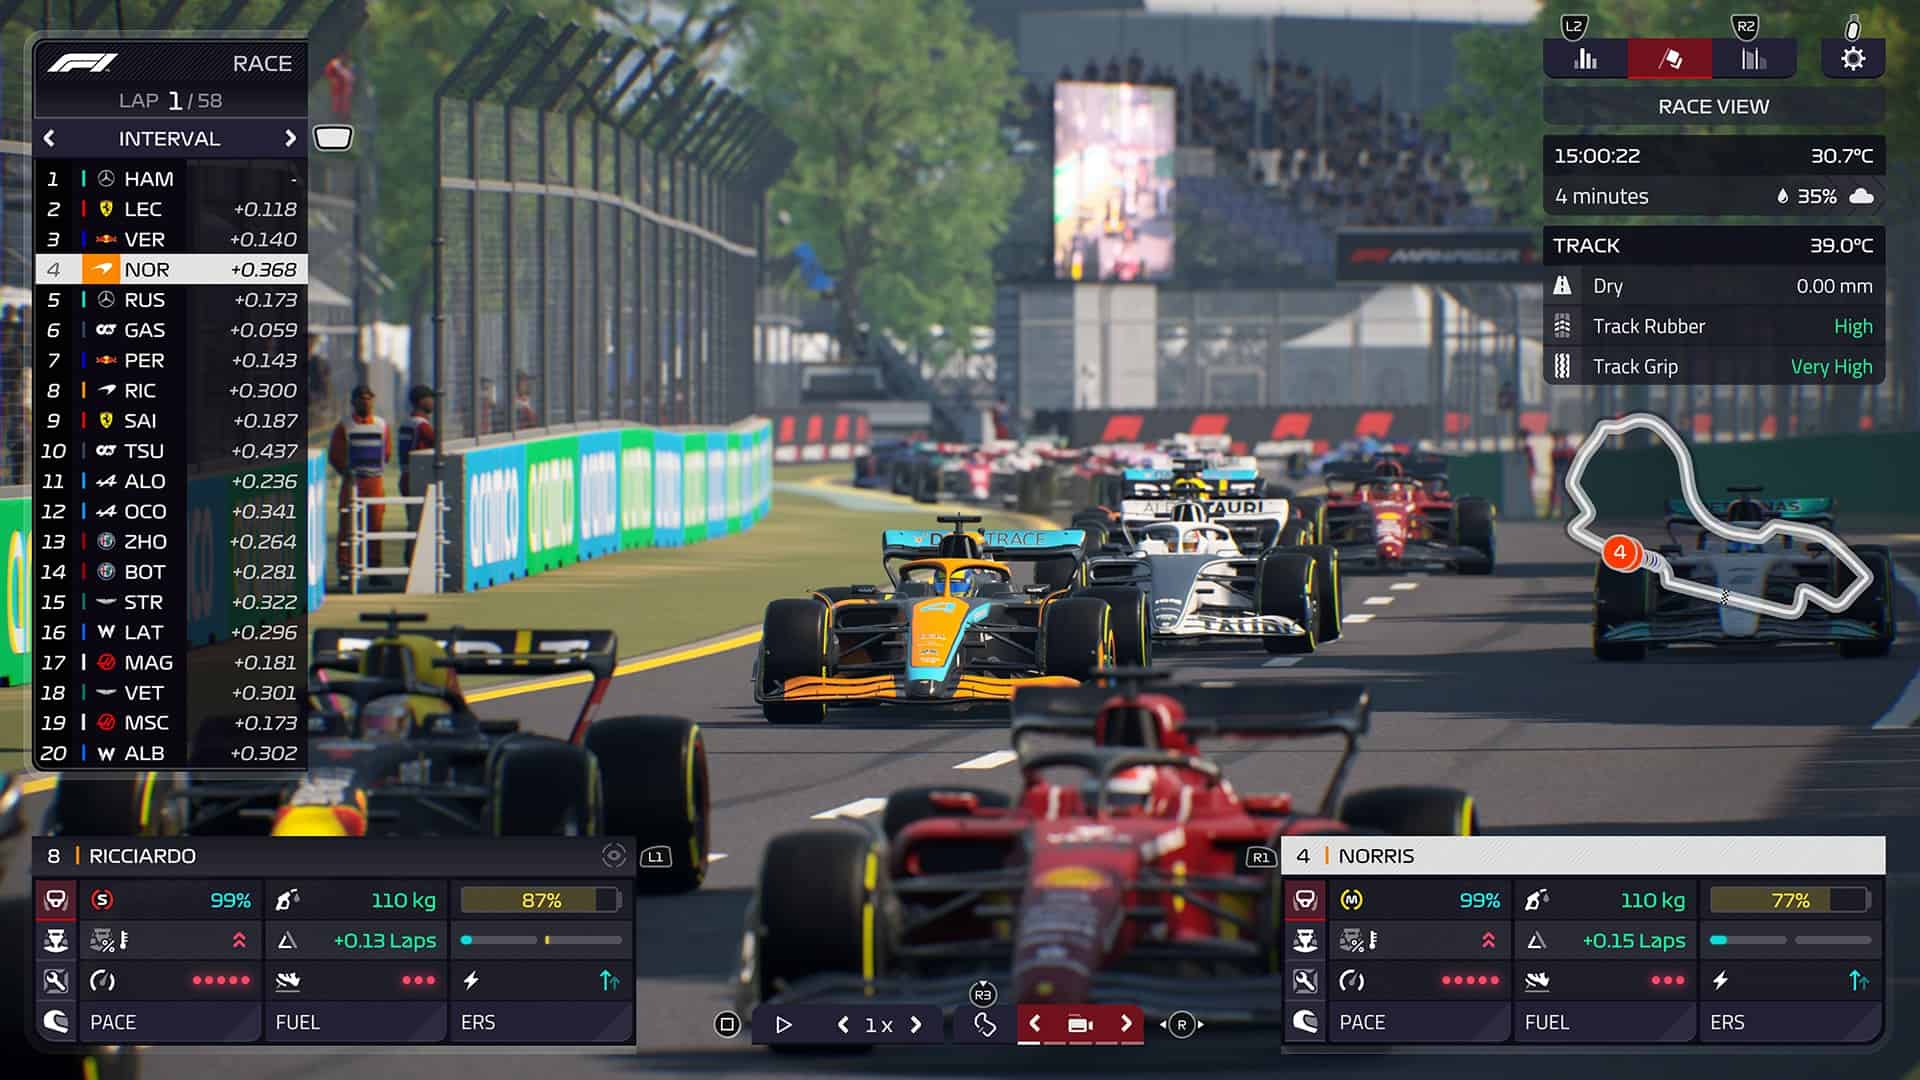 F1 Manager 2022, raceday in-race gameplay